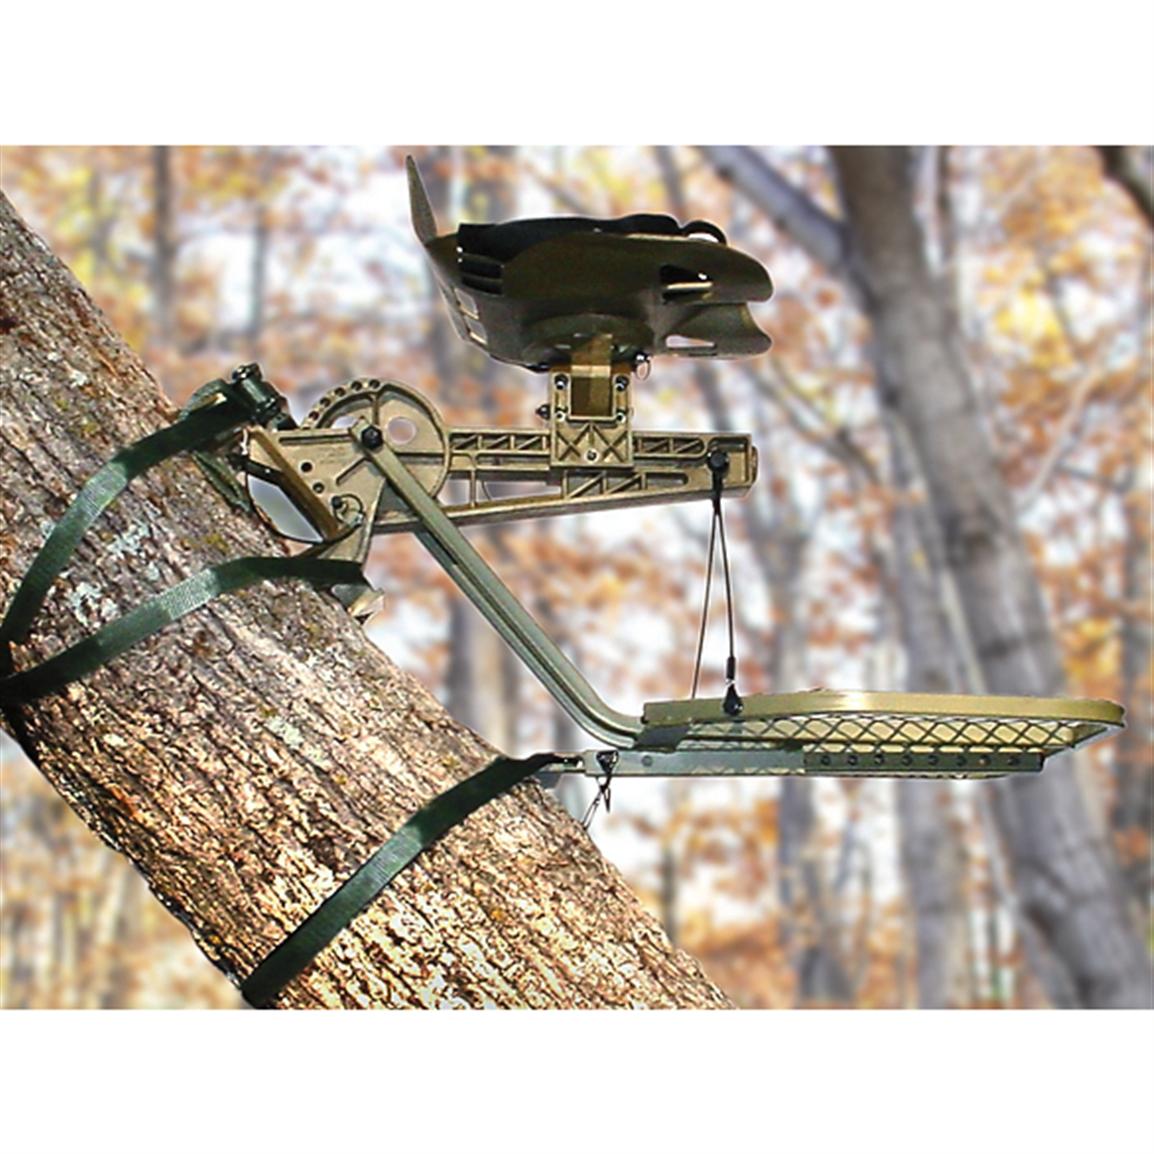 swivelimb-tree-stand-129299-hang-on-tree-stands-at-sportsman-s-guide